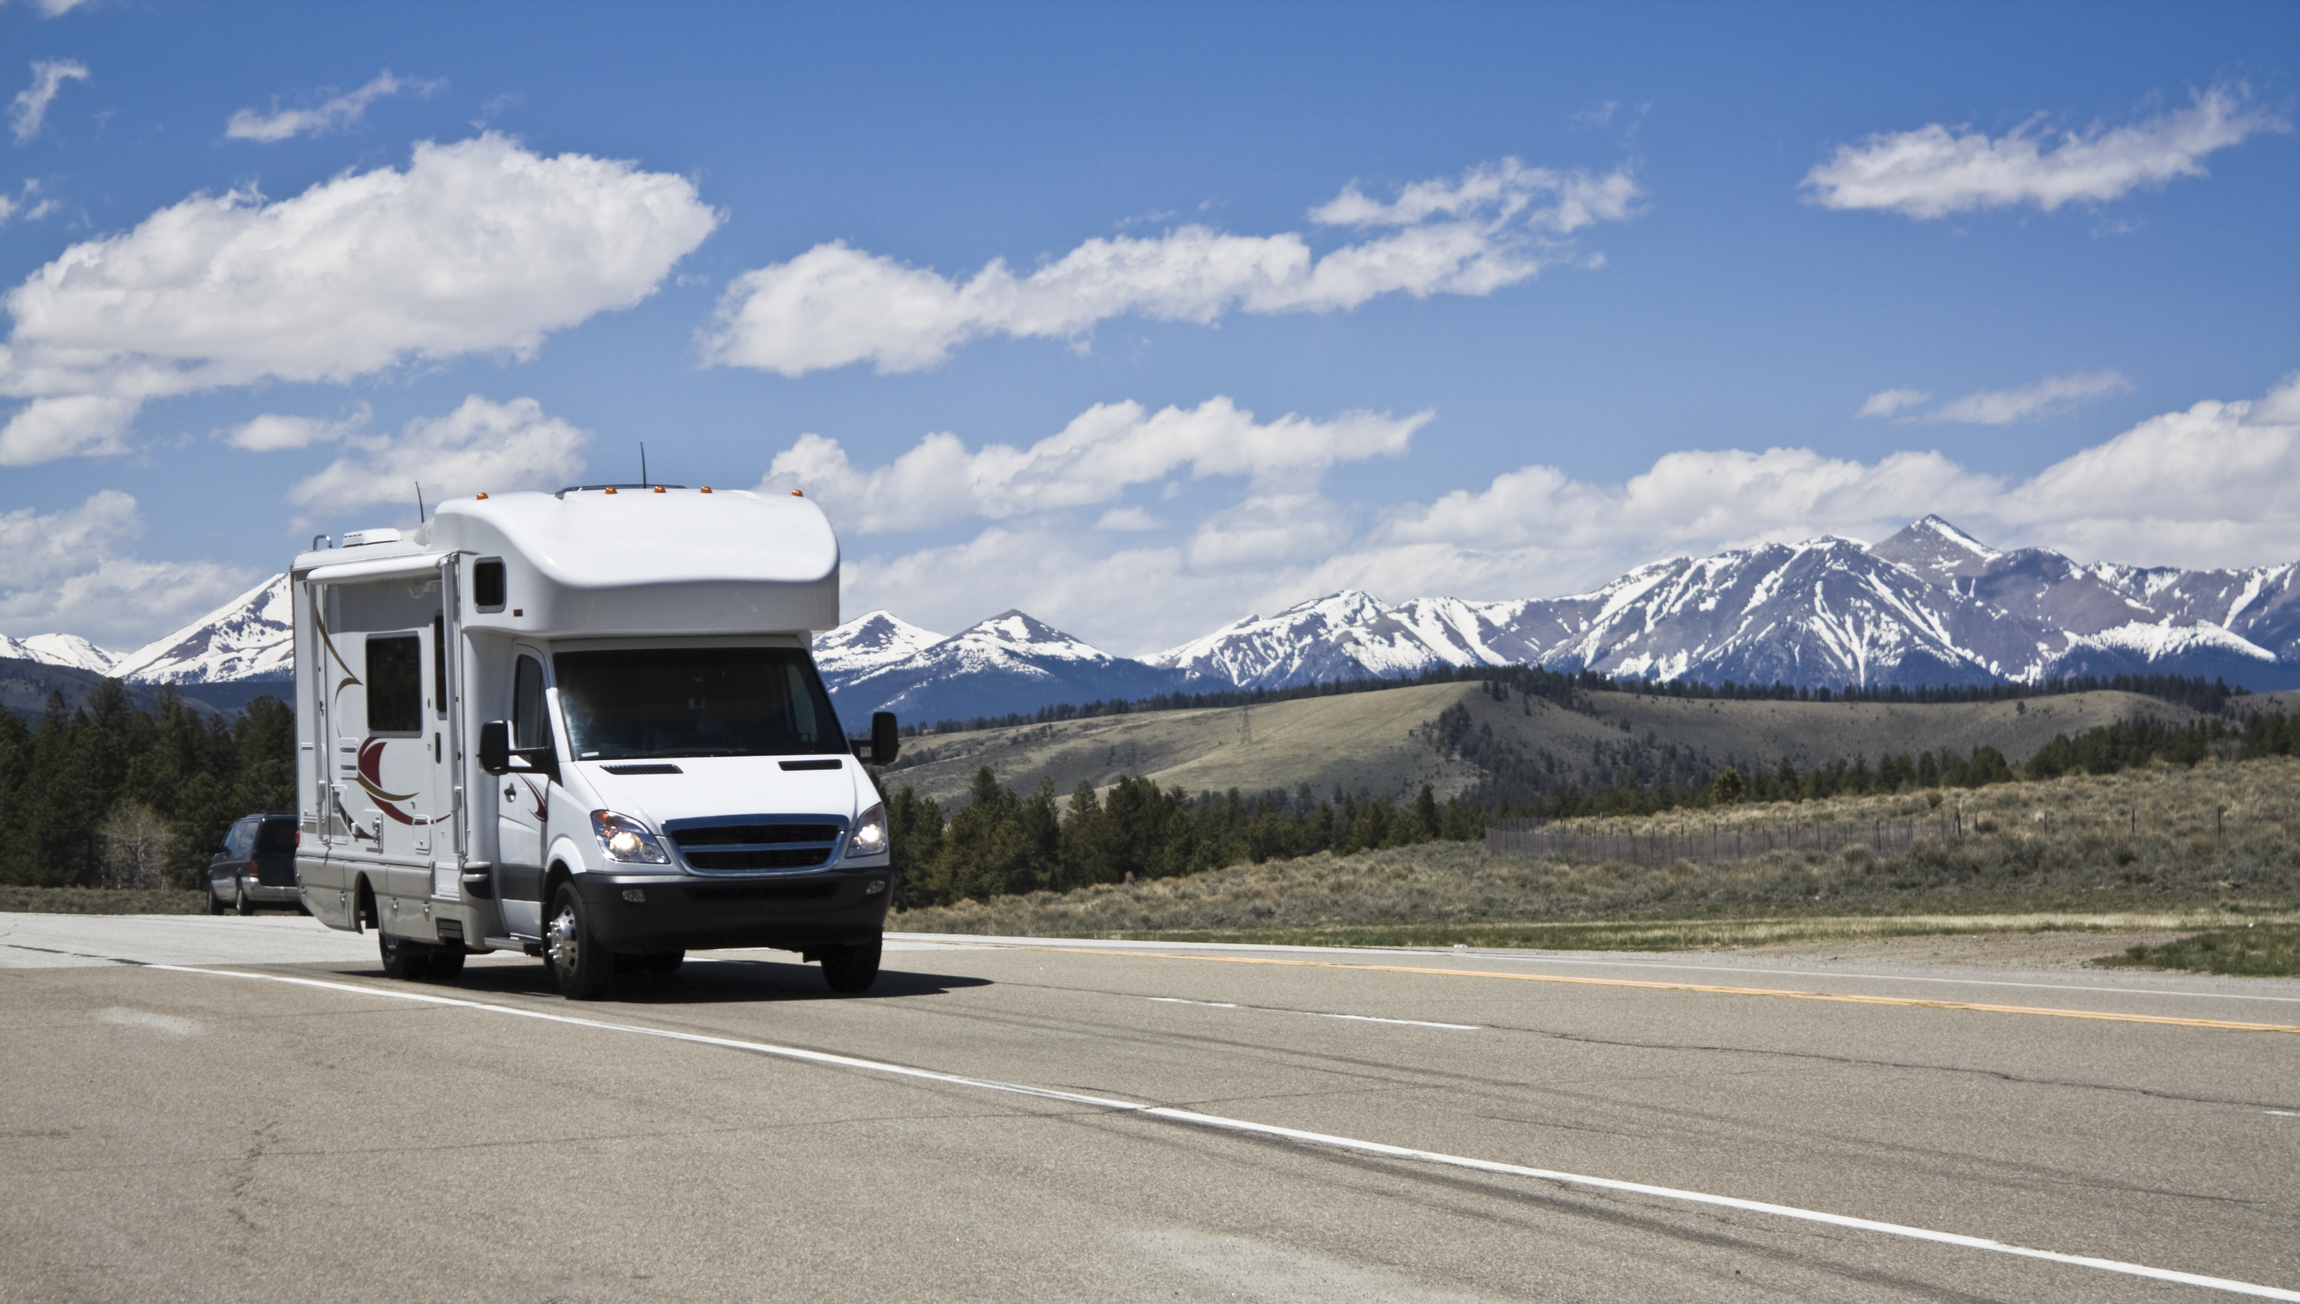 View of a highway in the Colorado Rockies with an RV.